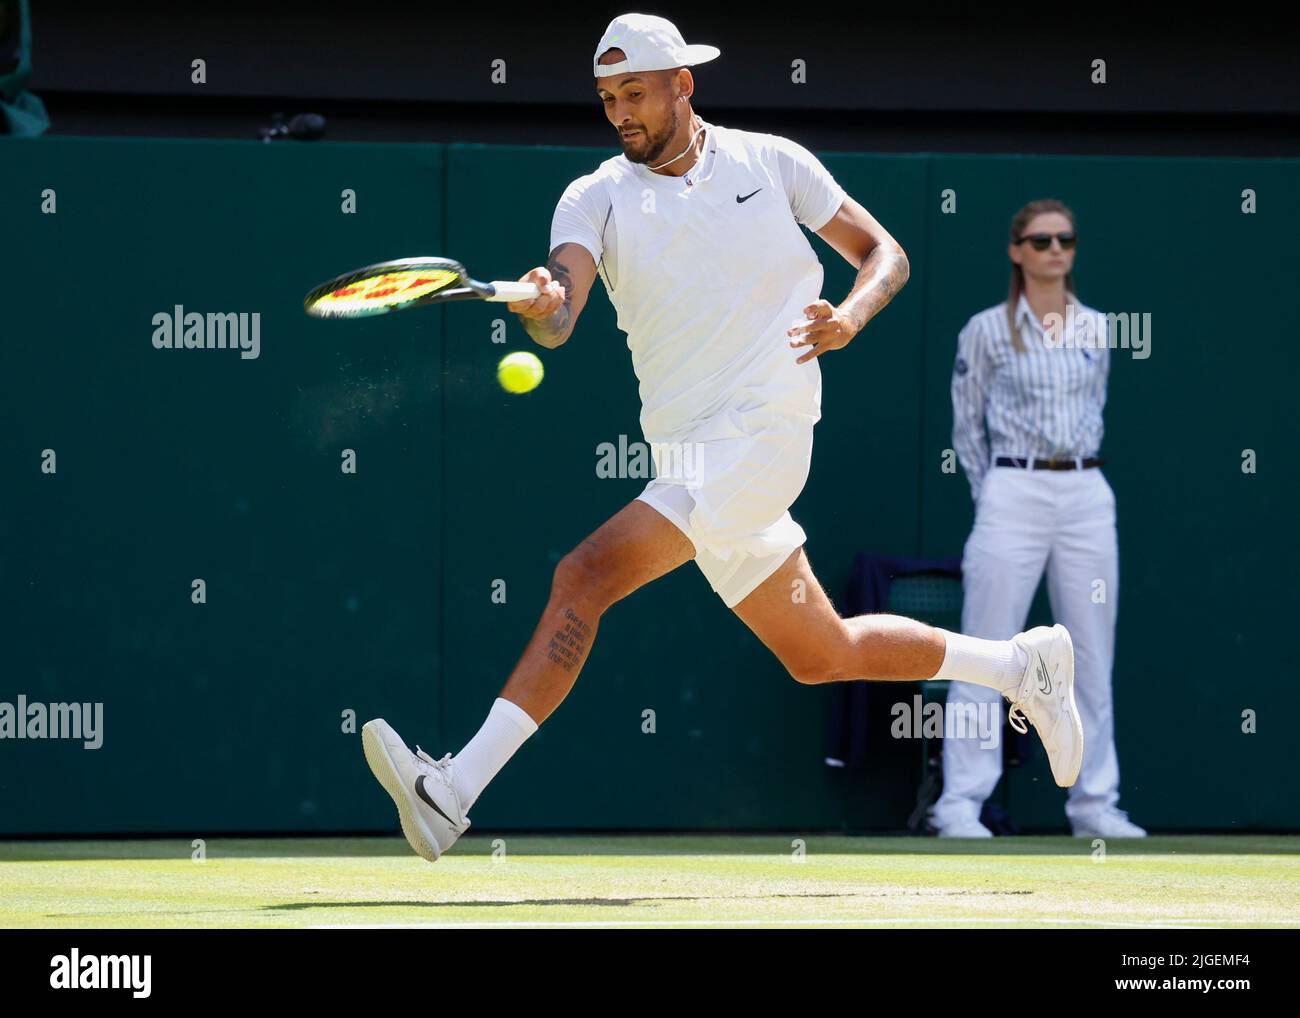 Wimbledon,Great Britain 10th. July, 2022. Australian tennis player Nick Kyrgios in action at the Wimbledon 2022  Championships on Sunday 10 July 2022.,  © Juergen Hasenkopf / Alamy Live News Stock Photo